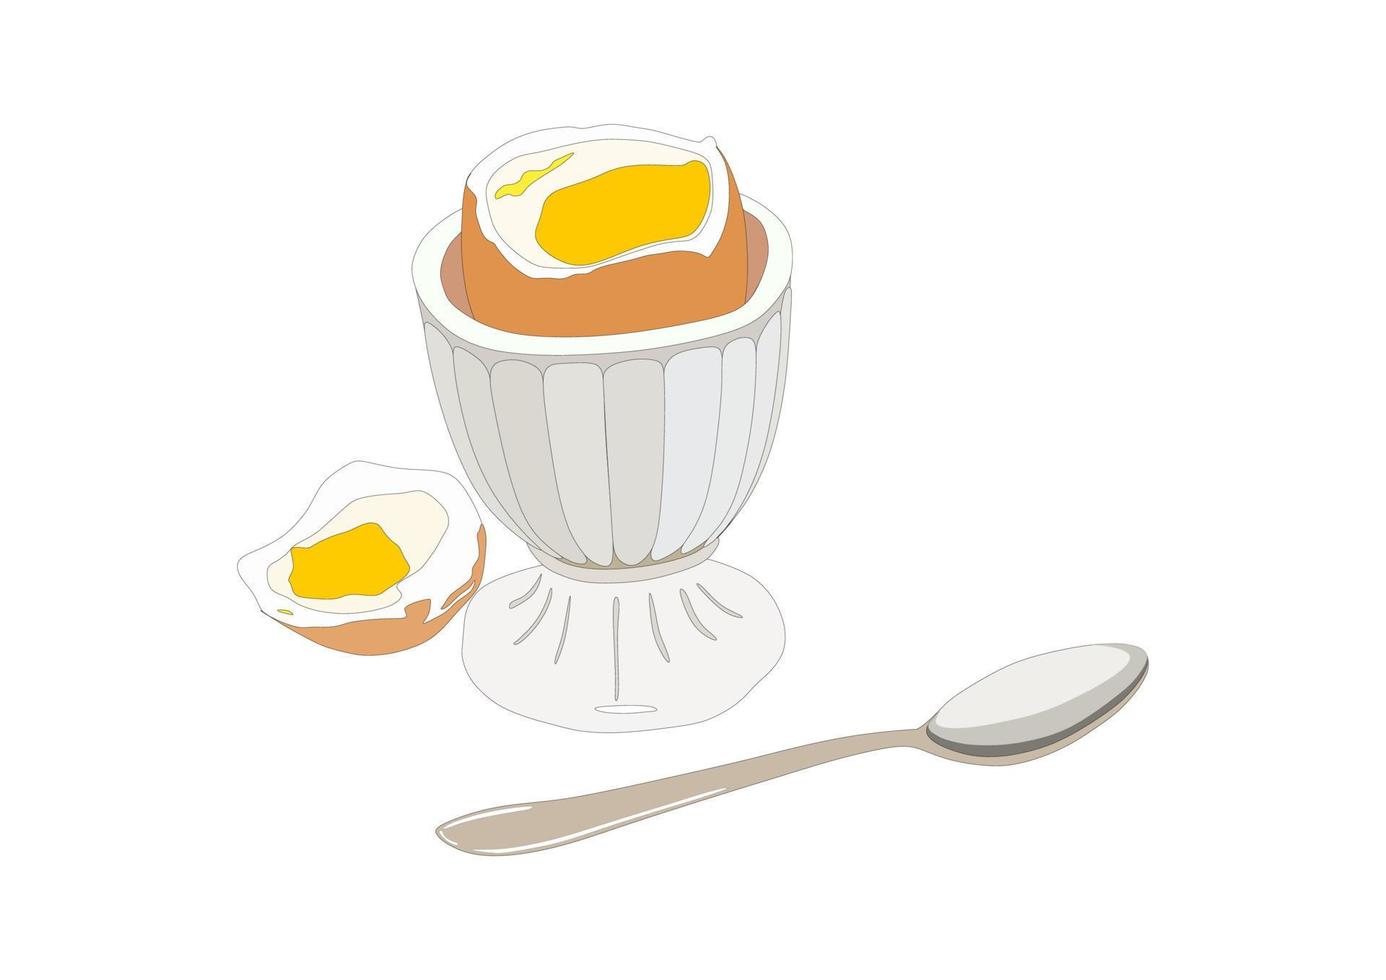 Boiled egg with eggshell for breakfast. Spoon. Dish. vector